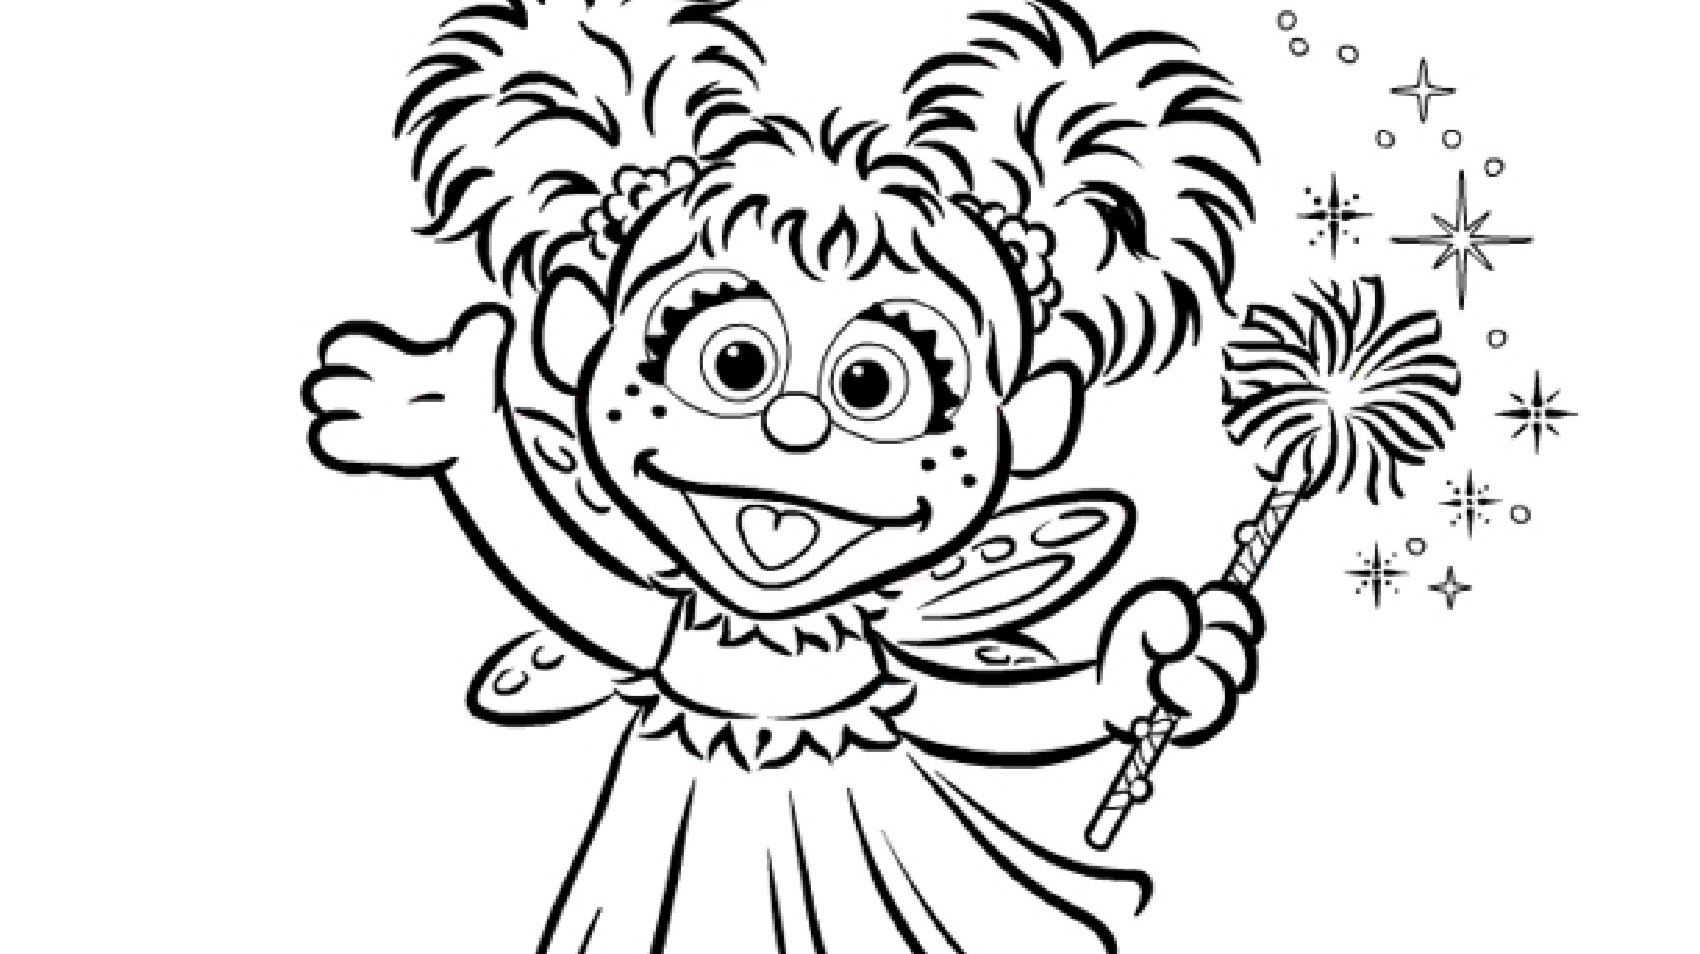 Abby cadabby coloring page kids coloringâ kids for parents